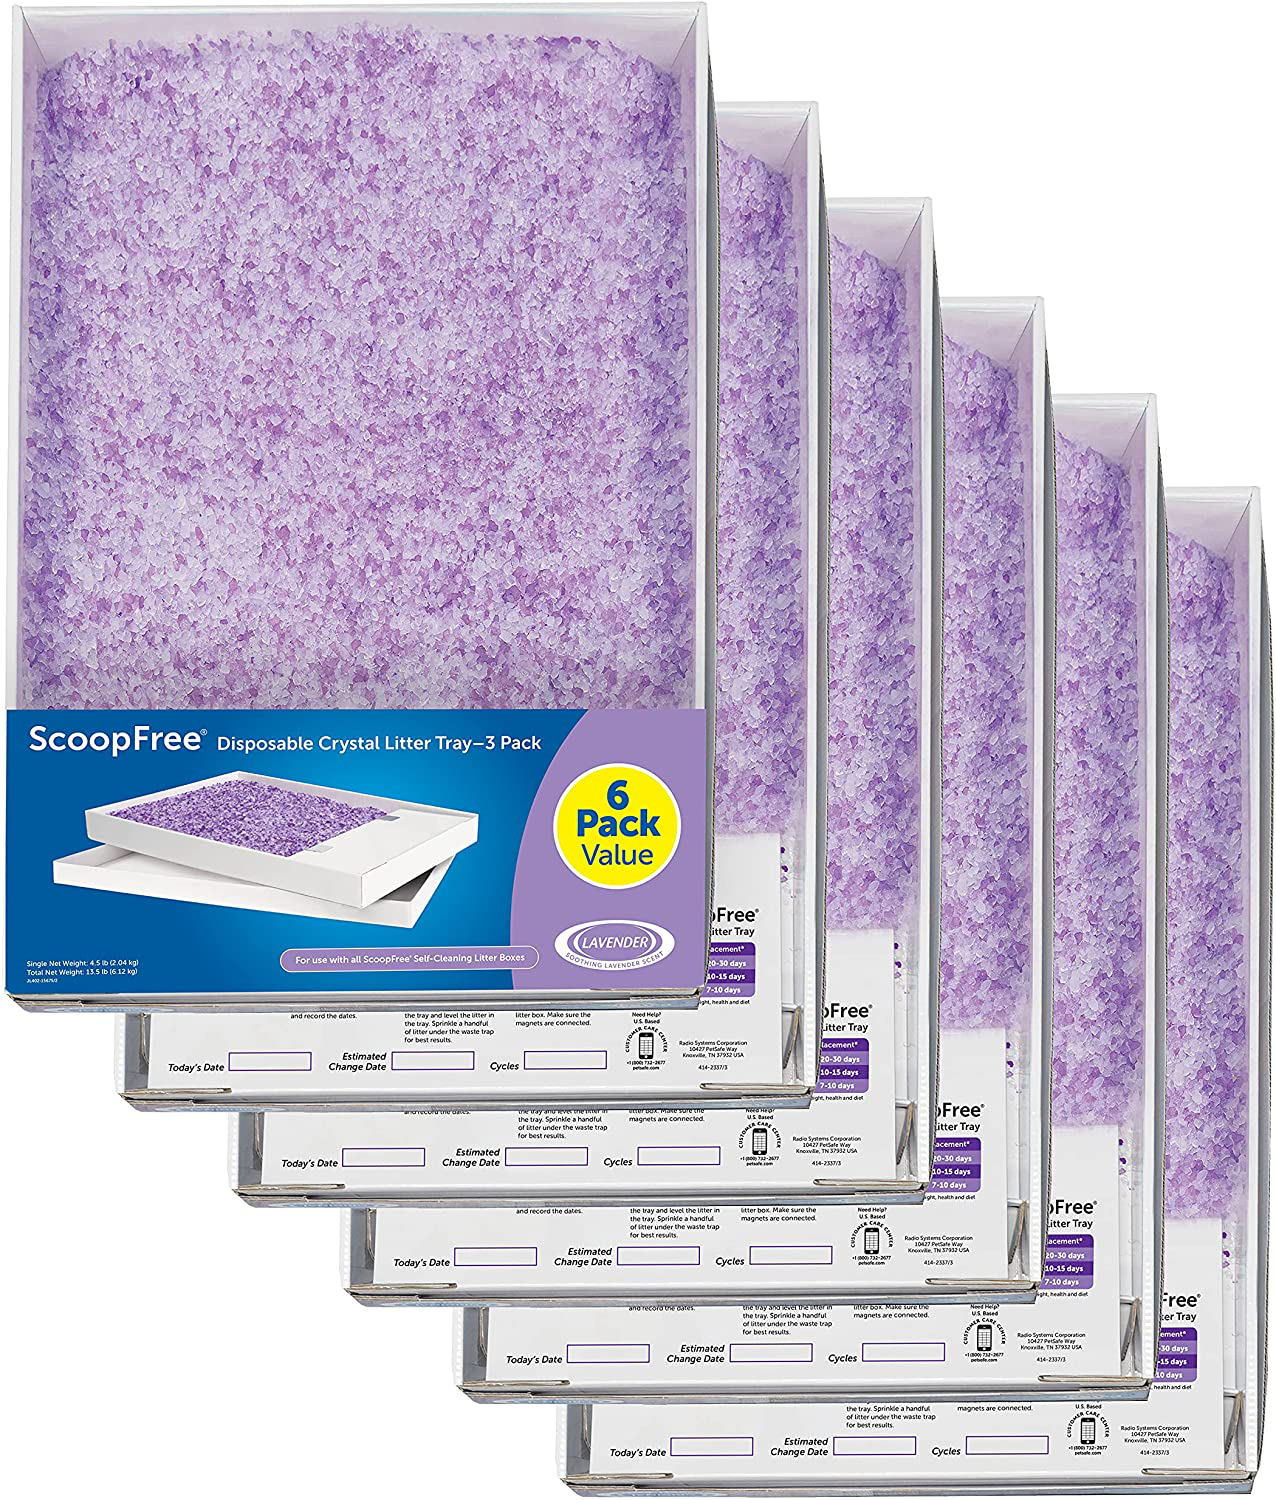 Petsafe Scoopfree Cat Litter Crystal Tray Refills for Scoopfree Self-Cleaning Cat Litter Boxes - 6-Pack - Non-Clumping, Less Mess, Odor Control - Available in Original Blue, Lavender, or Sensitive